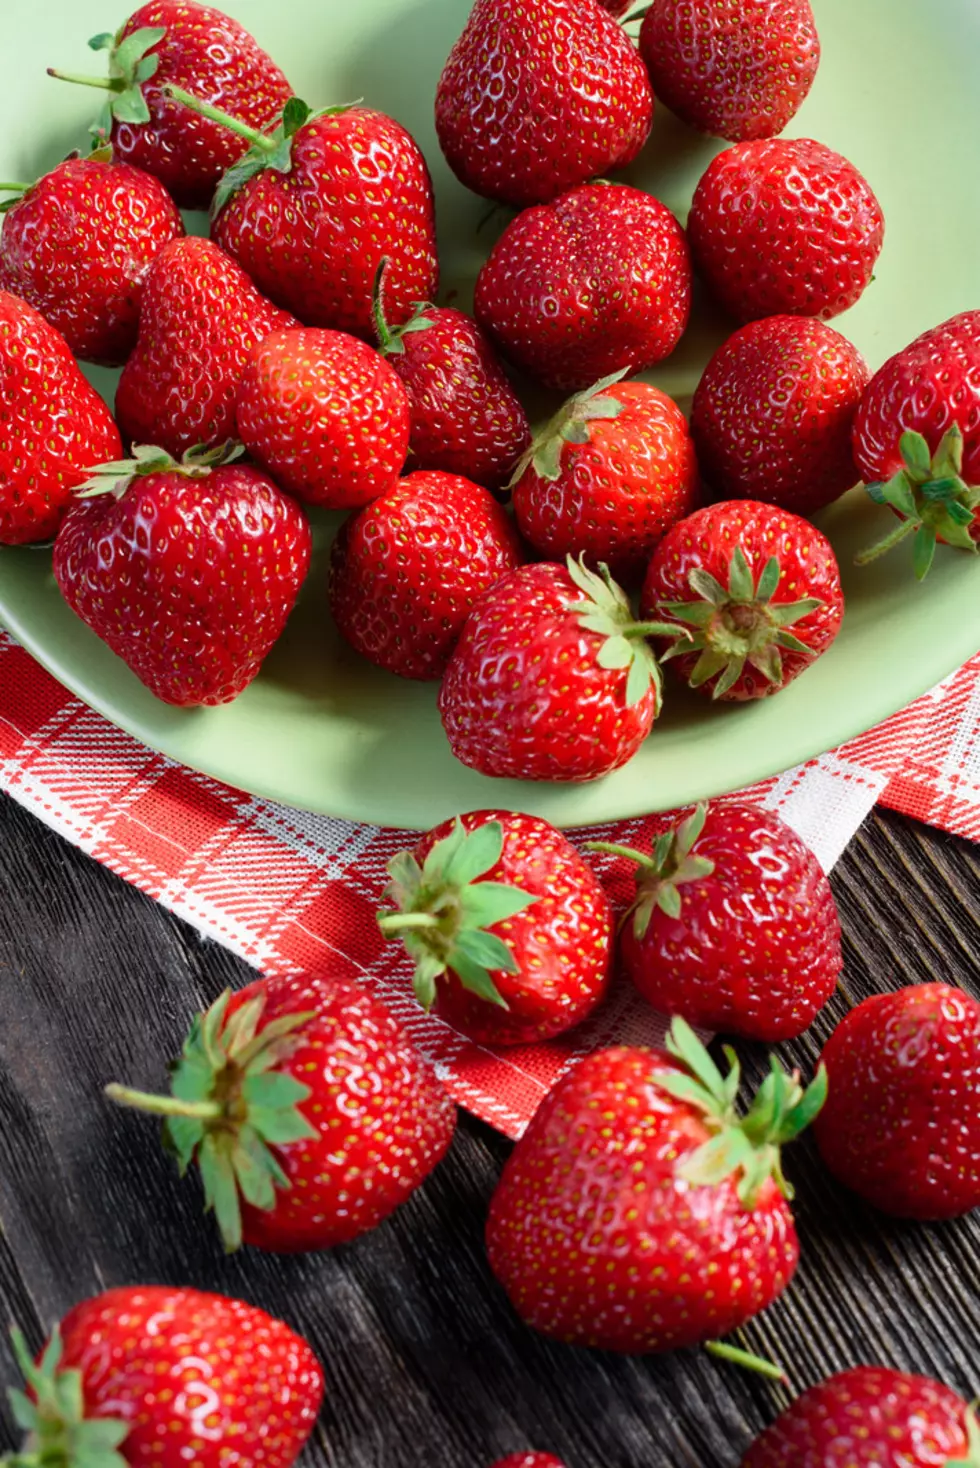 Major Strawberry Recall&#8230;Don&#8217;t Eat Those Strawberries Until You Read This